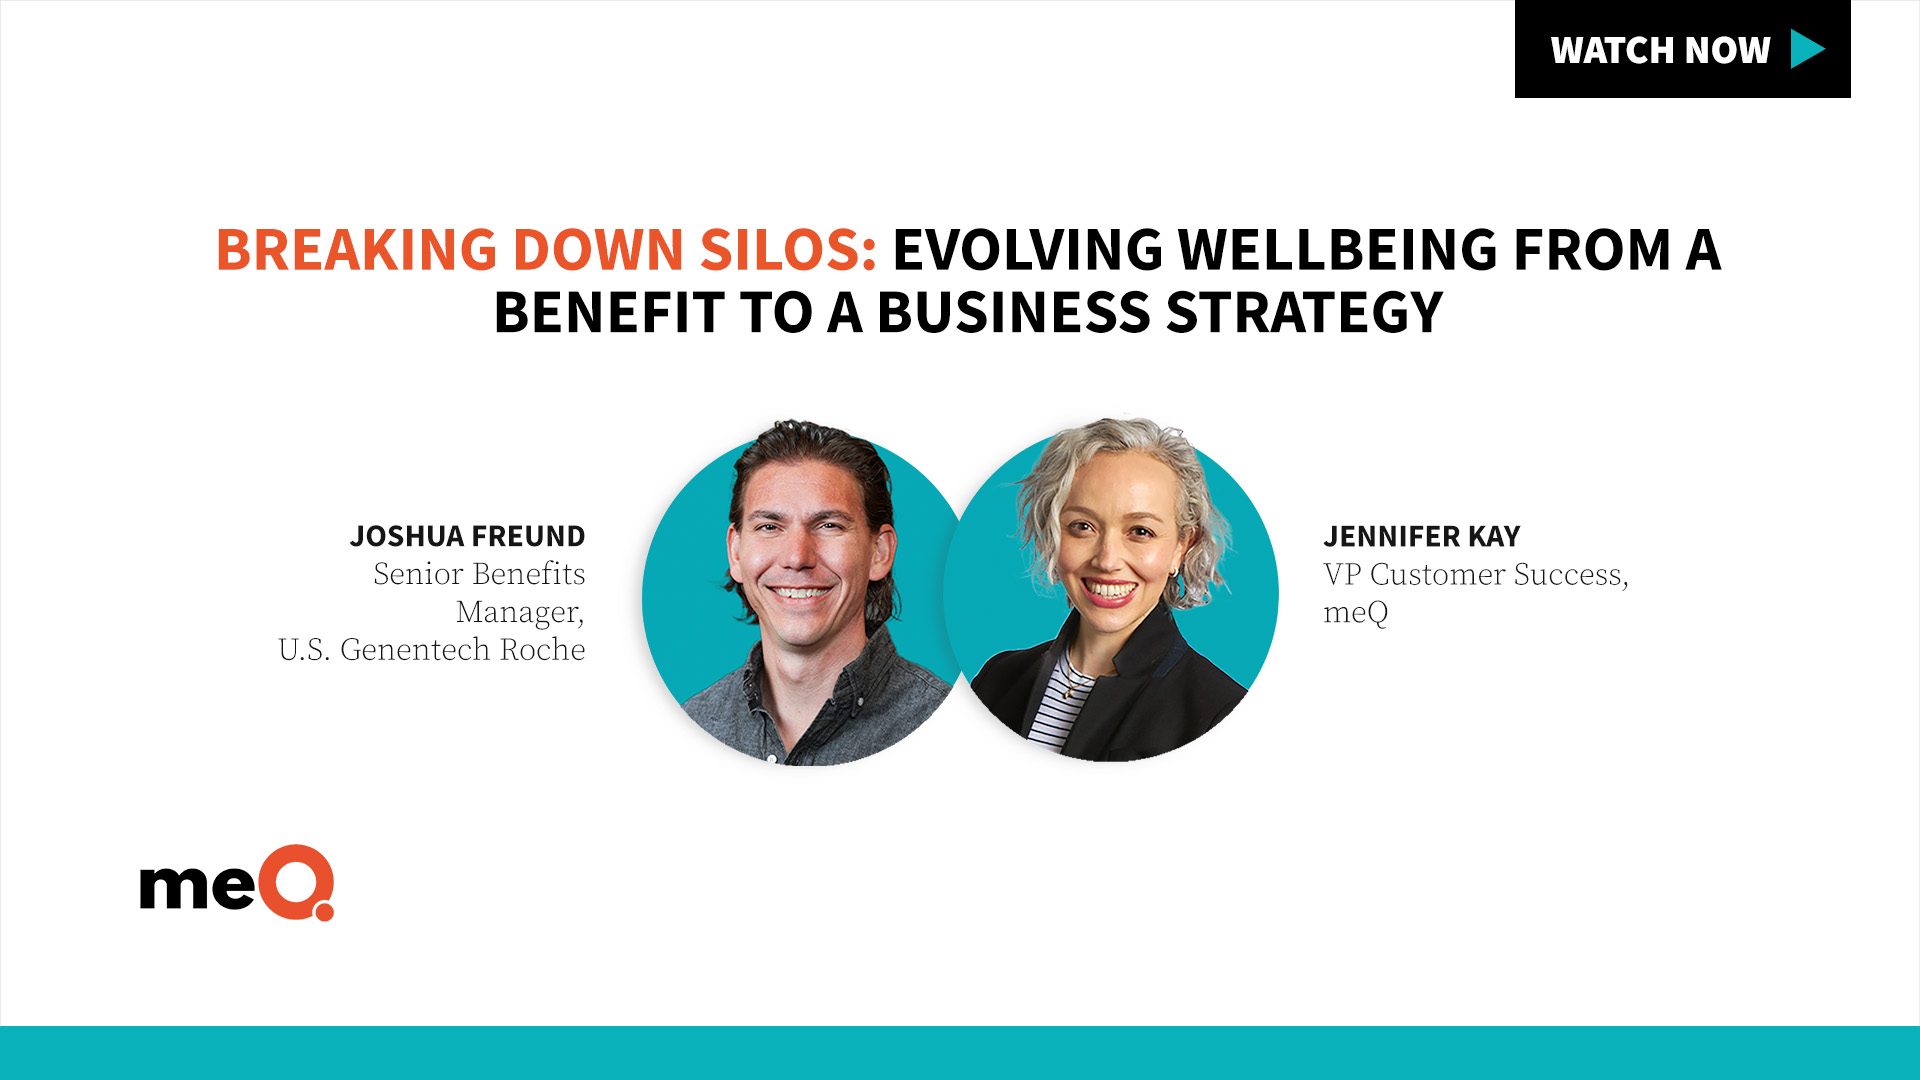 Evolving Wellbeing from a Benefit to a Business Strategy